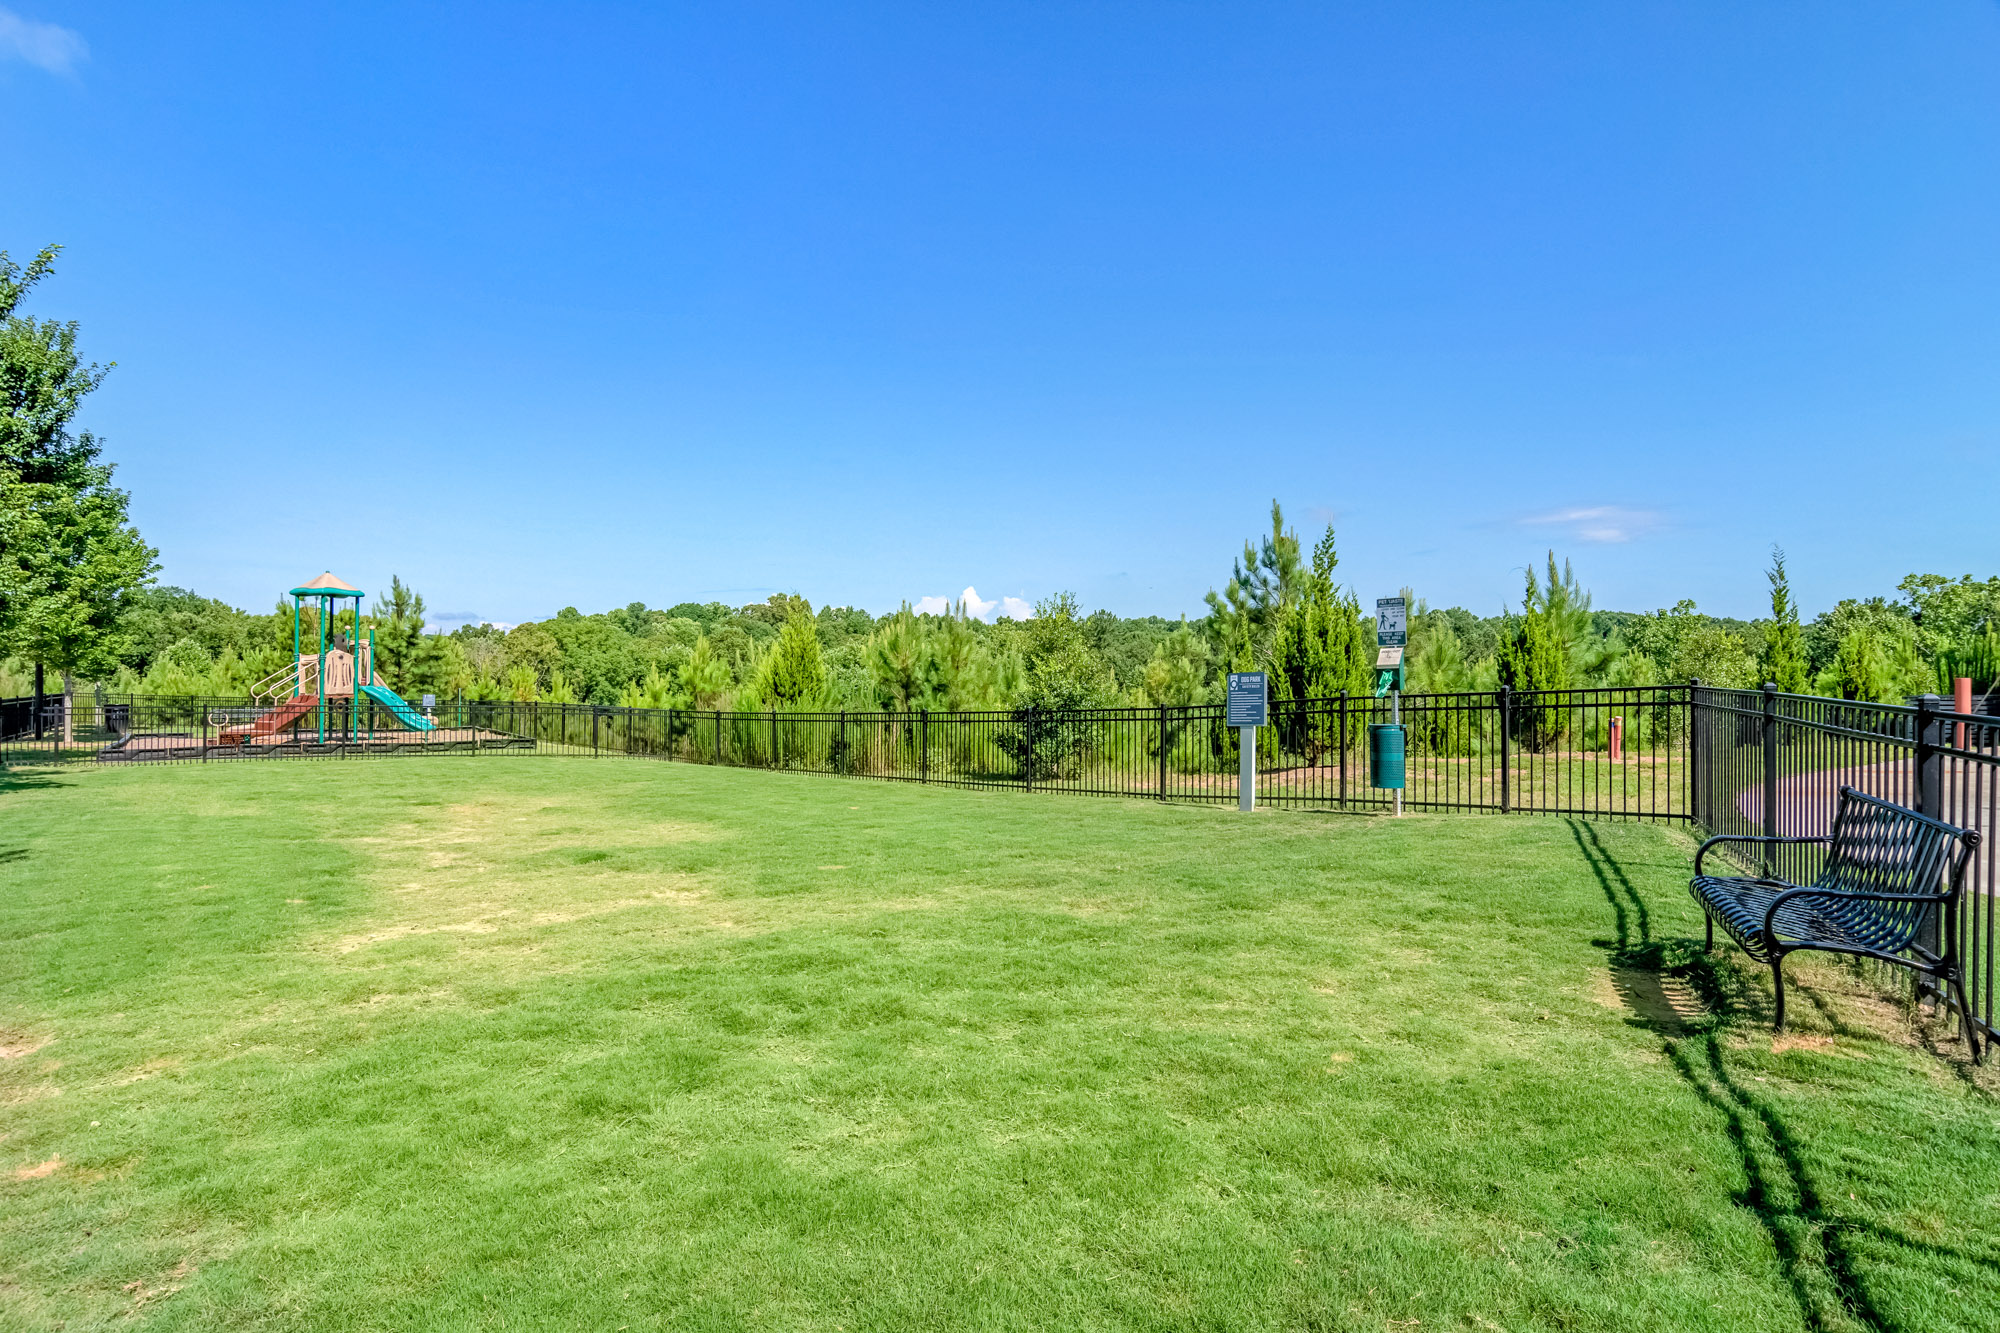 The dog park at Park 9 apartments in Woodstock, GA.